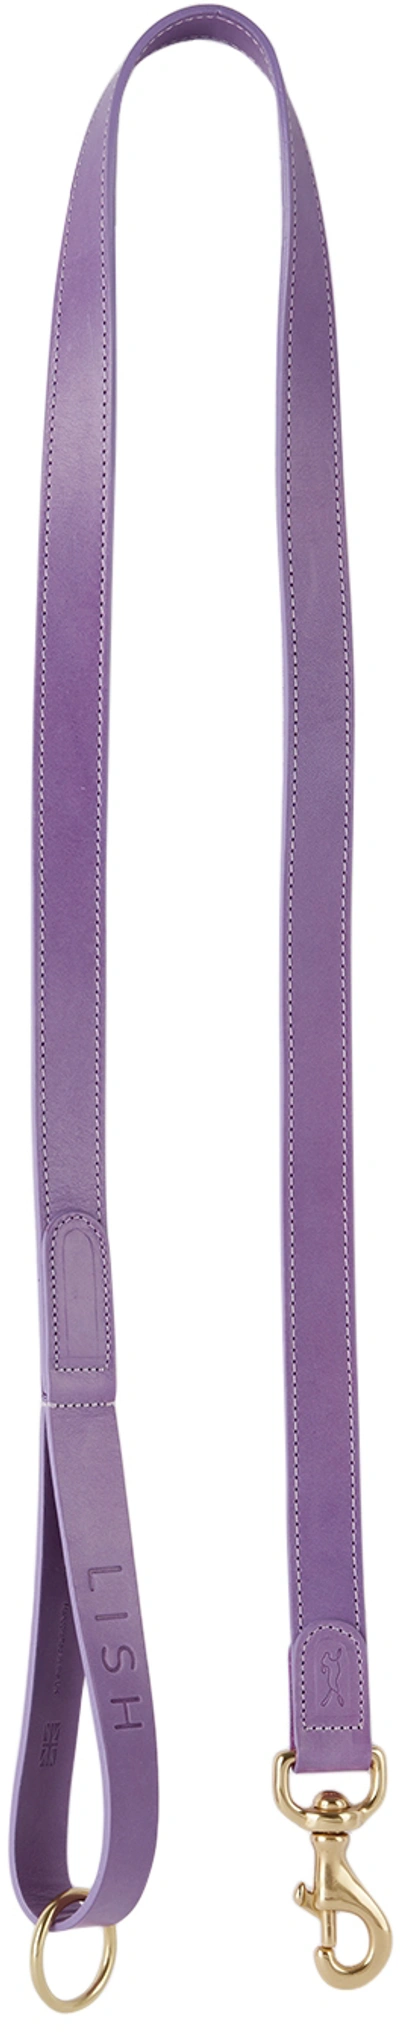 Lish Purple Large Coopers Leash In Violet